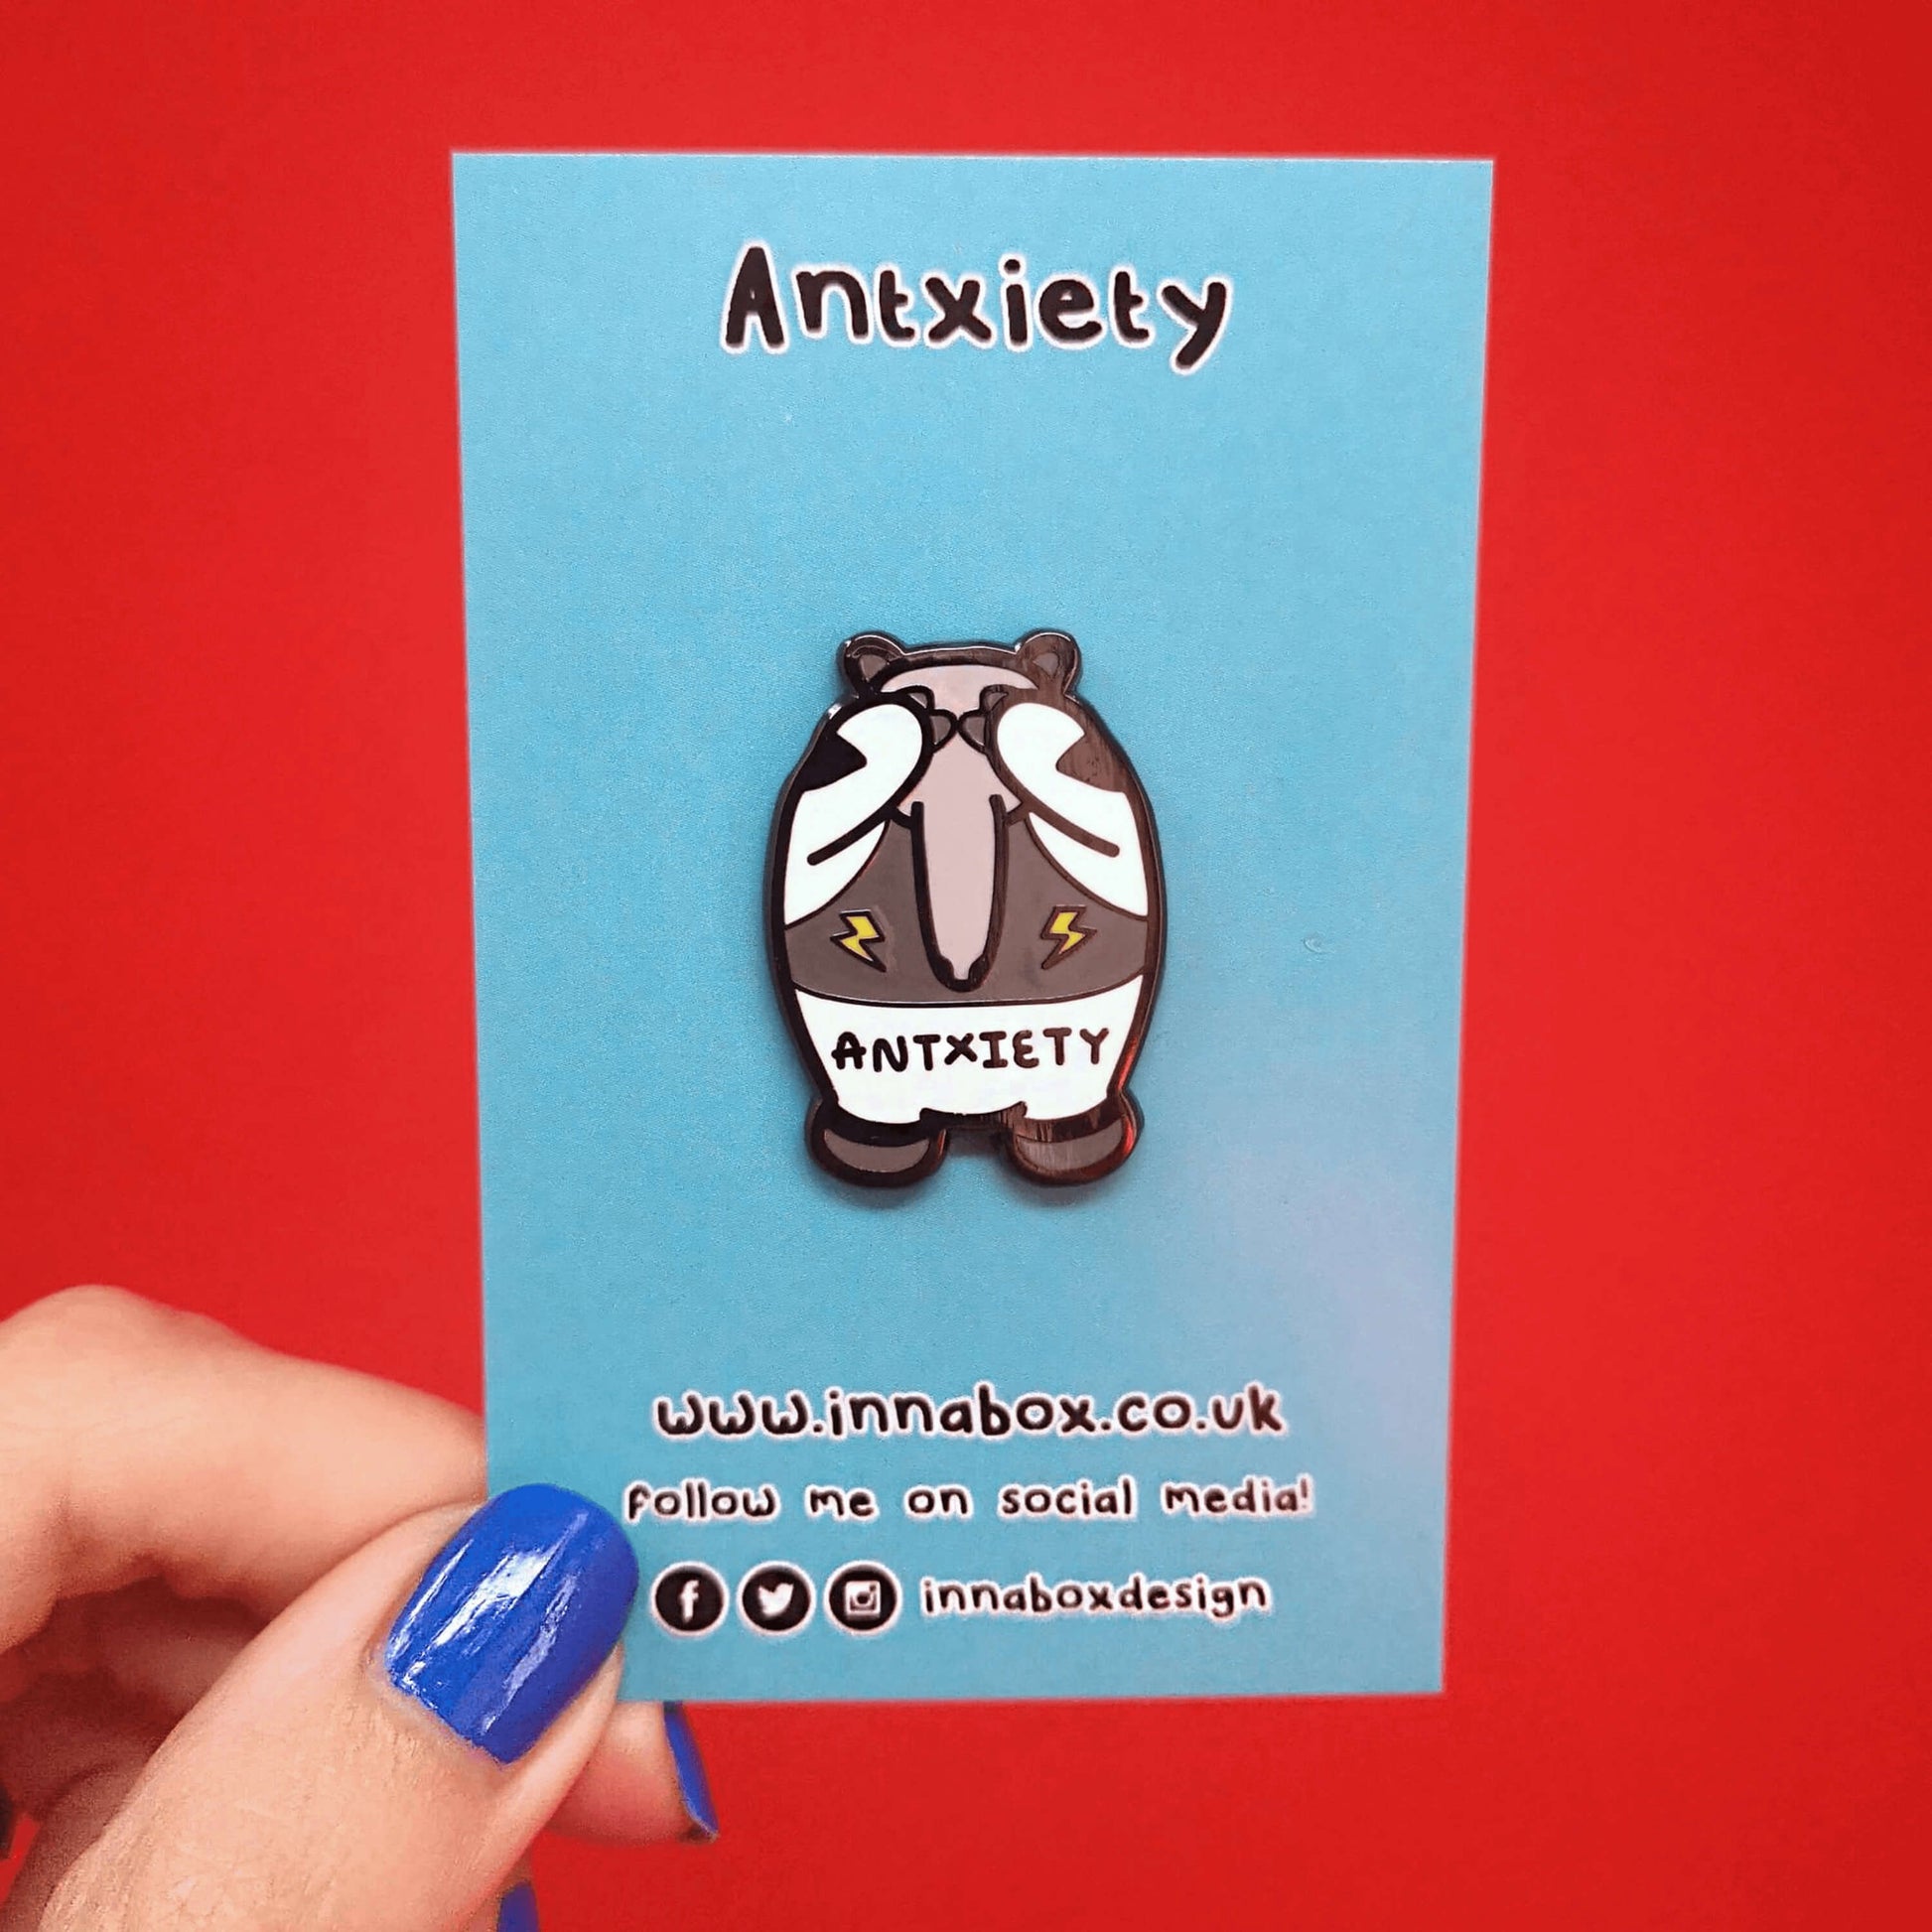 Antxiety Enamel Pin on a blue backing card being held up by a hand with blue nail varnish in front of a red background. The pin is a grey and white anteater with yellow lightning bolts and the word antxiety across its belly. The pin is designed to raise awareness for anxiety disorders and anxious emotions.